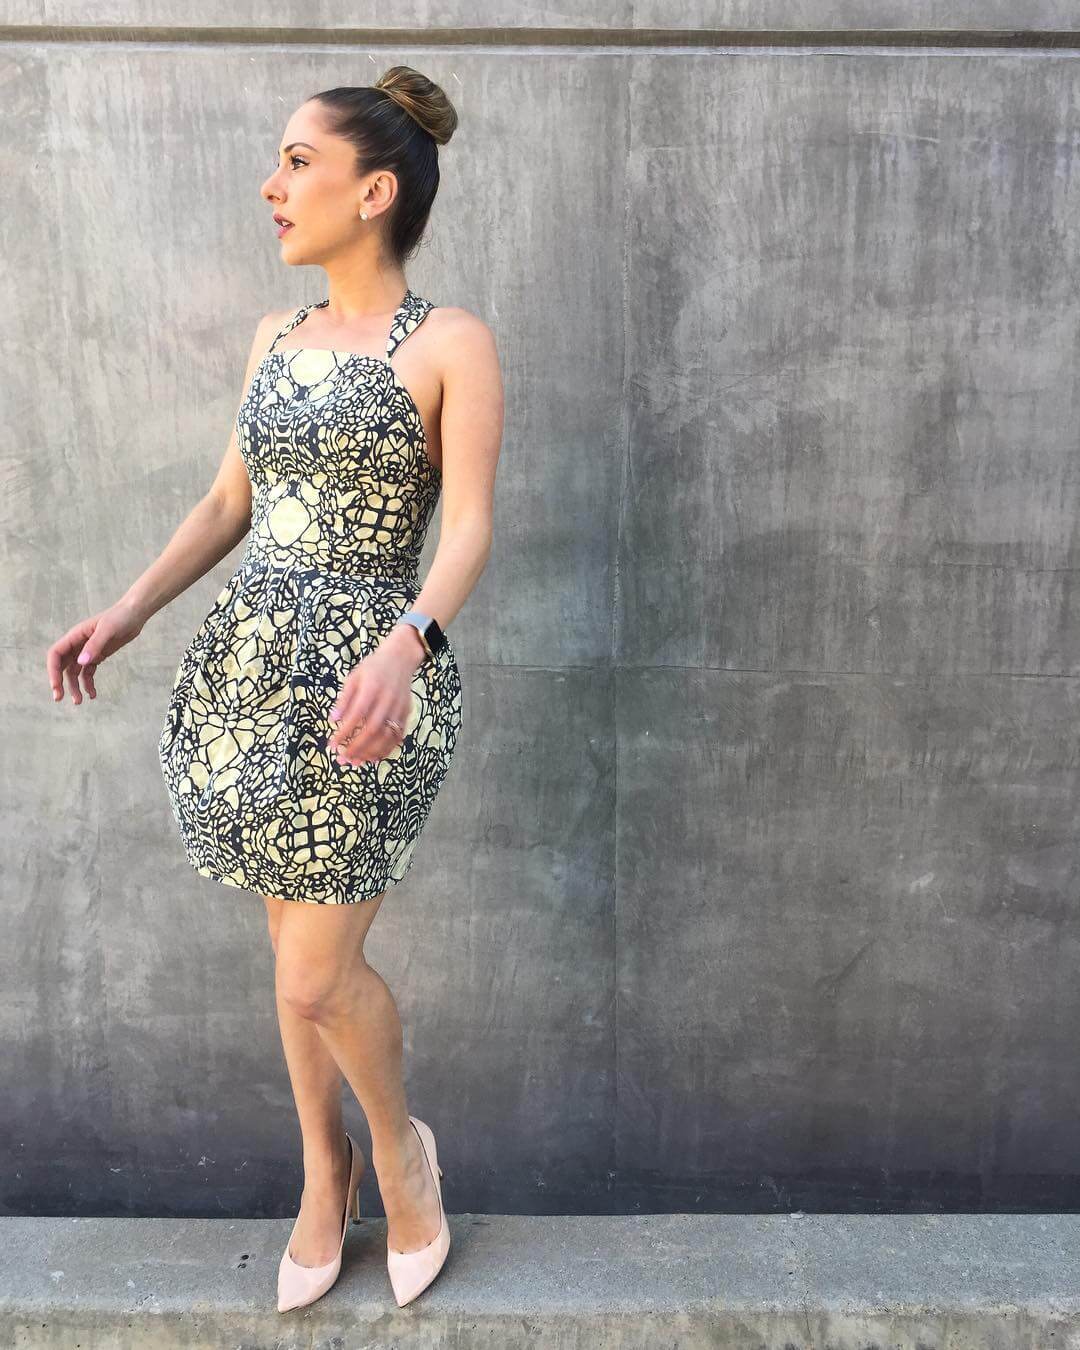 49 Sexy Ana Kasparian Feet Pictures Are Delight For Fans | Best Of Comic Books